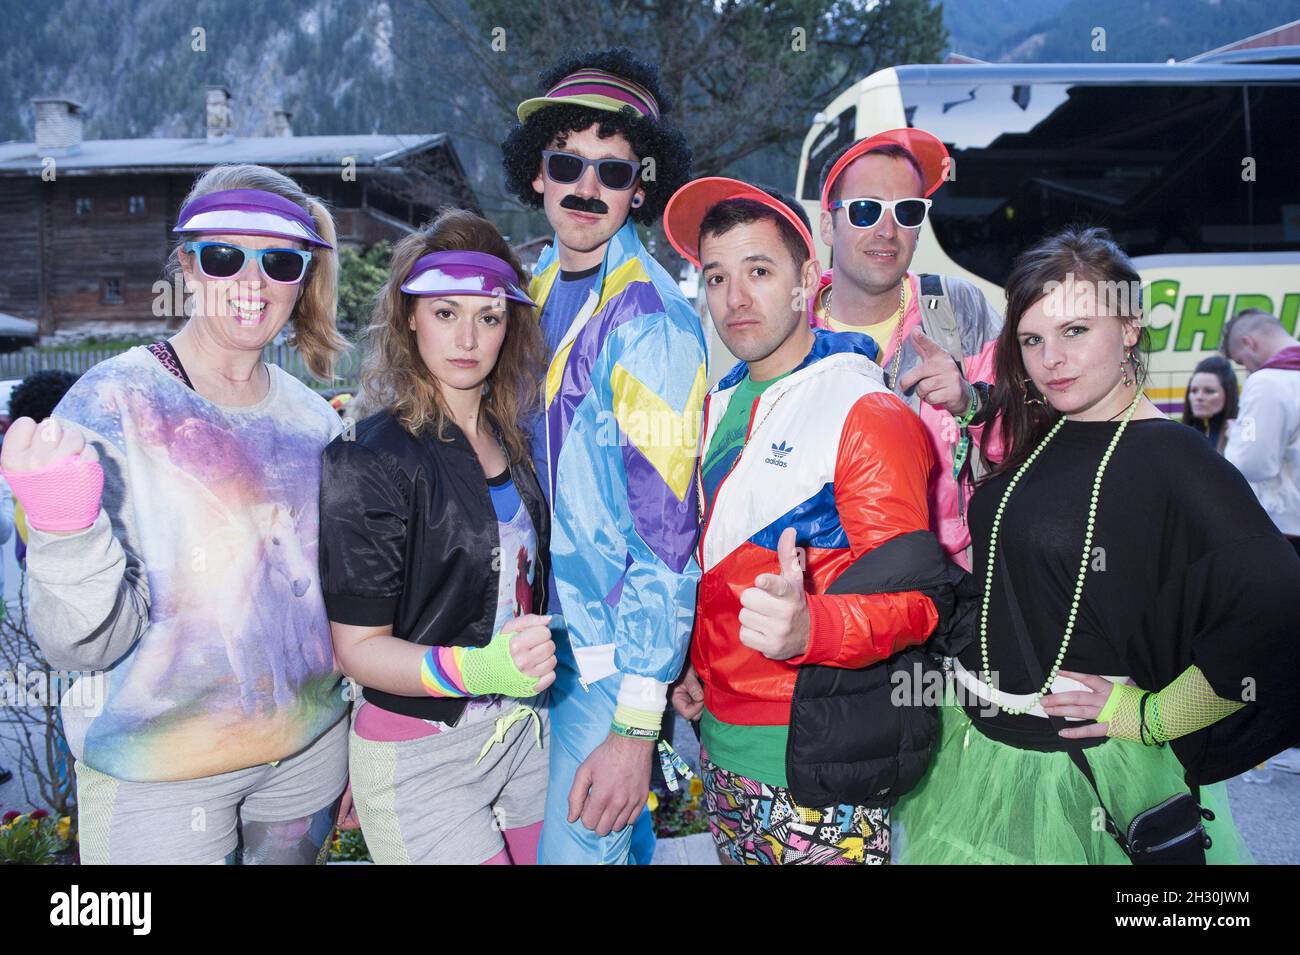 80s Themed Photography and Images - Alamy